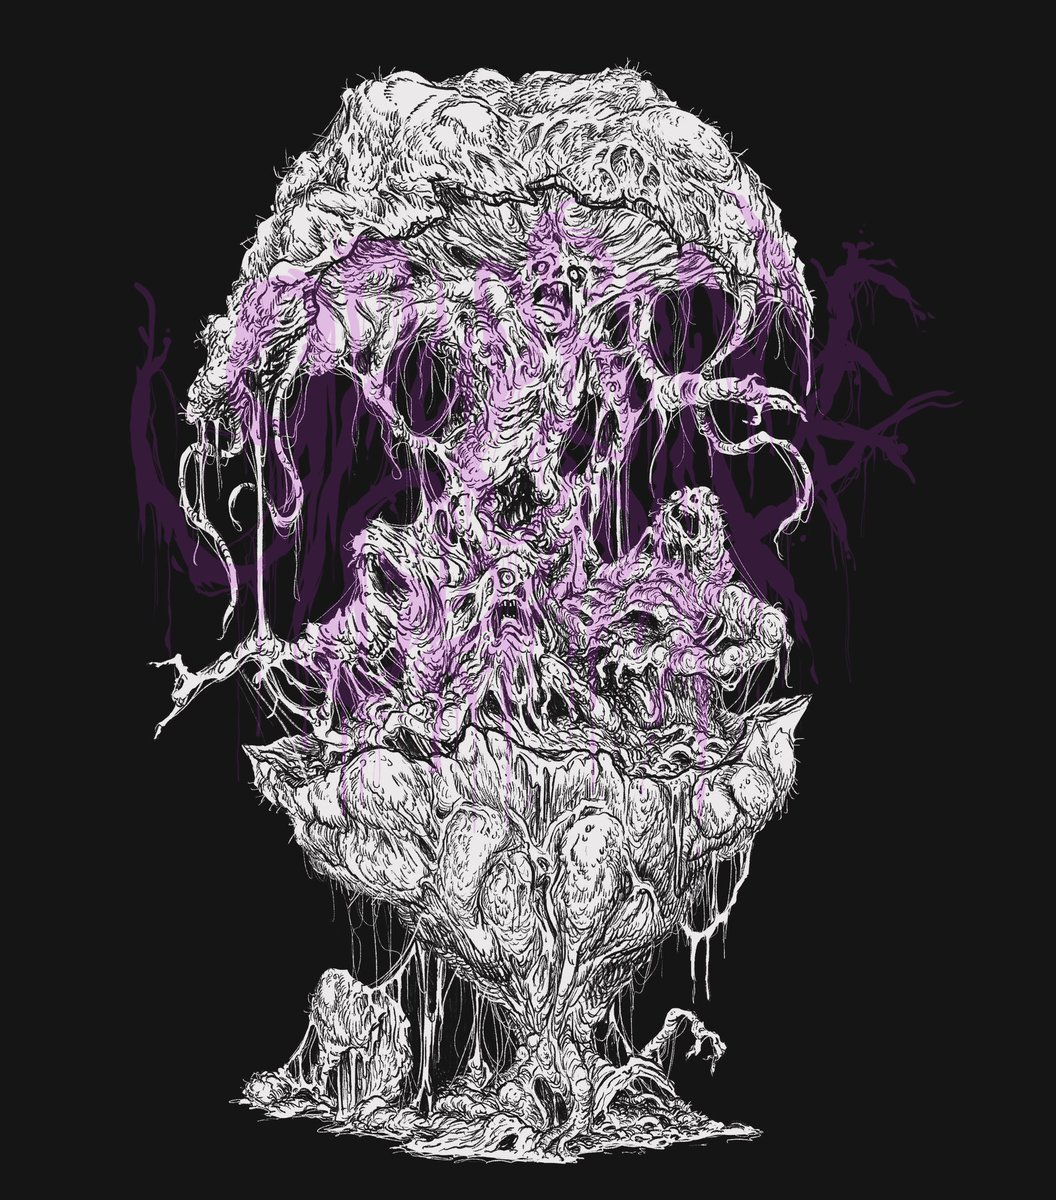 Again no idea what this mushroom cadaver breeding thing is. but u can have it. #deathmetalillustration #deathmetalart #deathmetal #deathmetalmusic #illustrator #gruesomegraphx